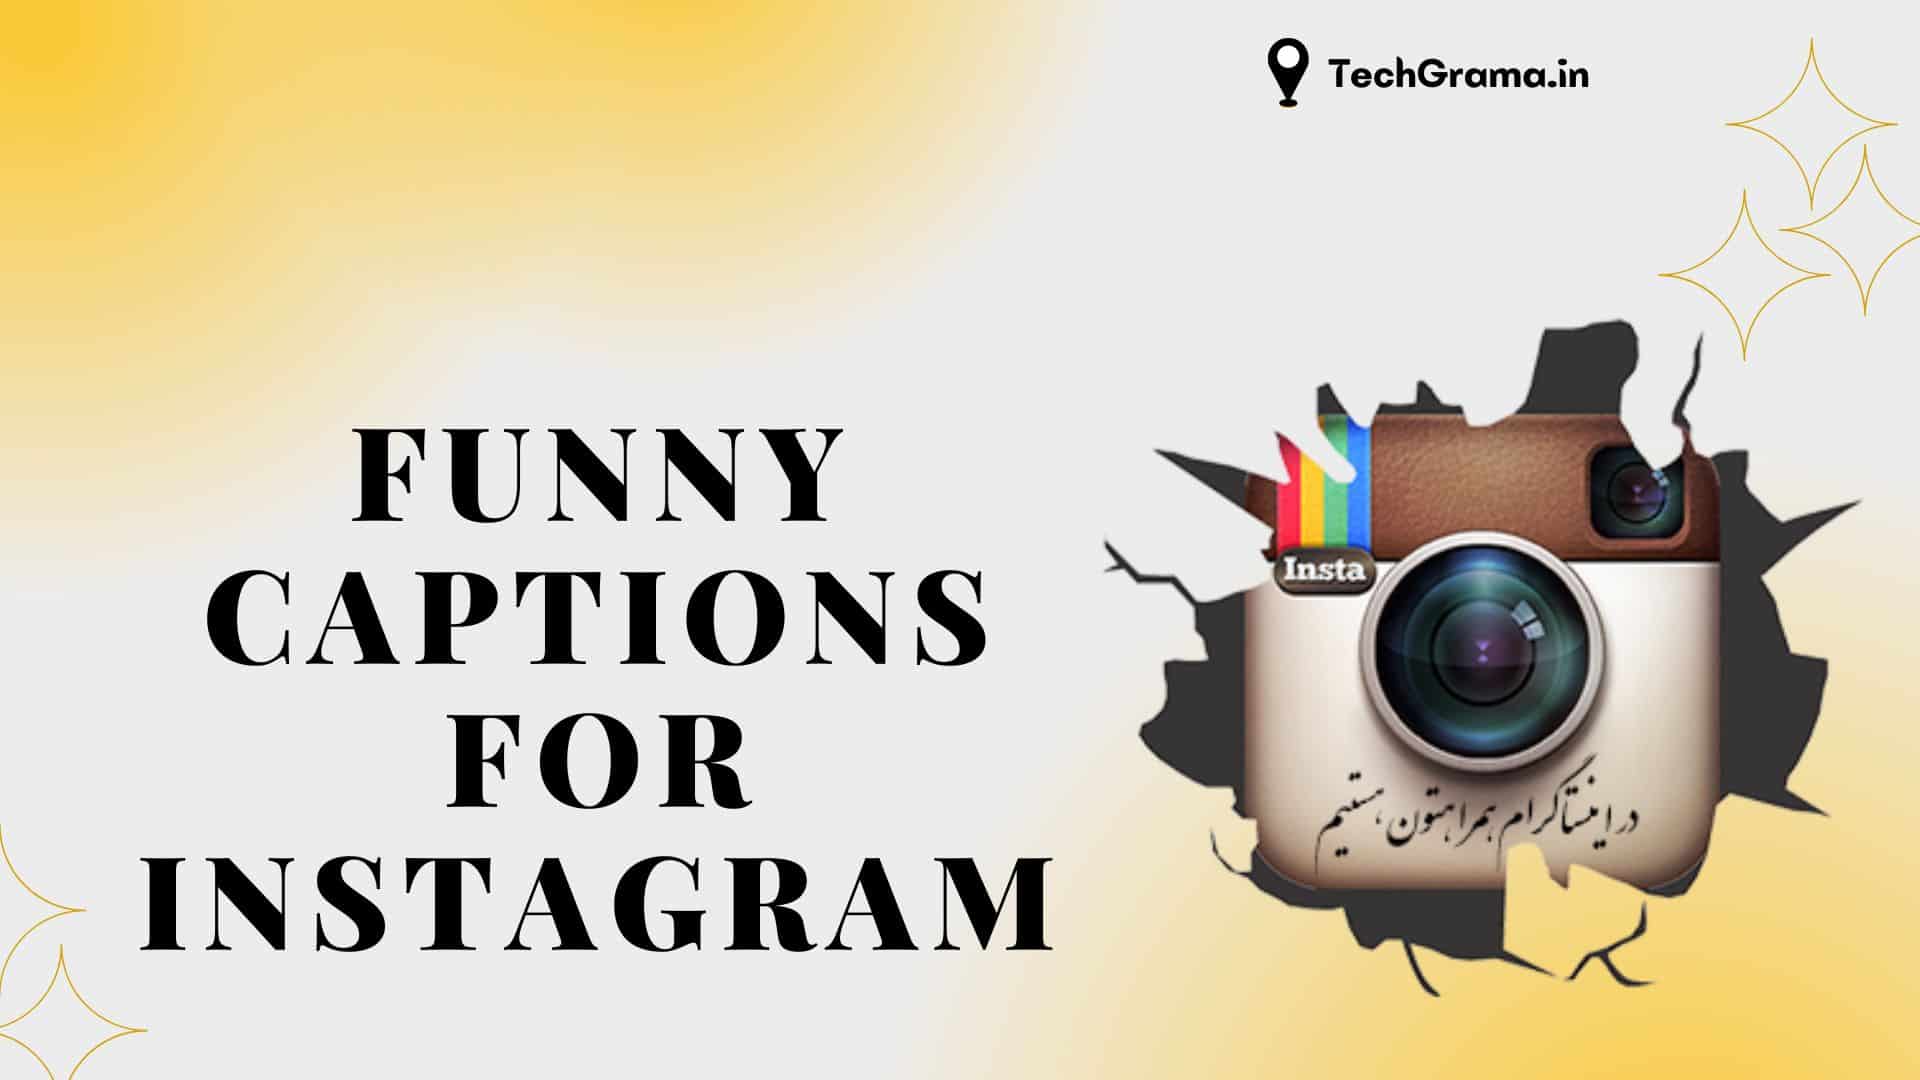 Best Funny Captions For Instagram, Funny Captions For Selfies, Funny Pictures With Captions, Funny Captions For Guys, Funny Captions For Friends, Funny Captions For Couples, Funny Instagram Captions For Girls & Boys, Funny Instagram Captions, Funny Quotes For Girls & Boys, Funny Captions For Pictures of Yourself, Funny Girl Pictures With Captions, Funny Captions For Girls & Boys.